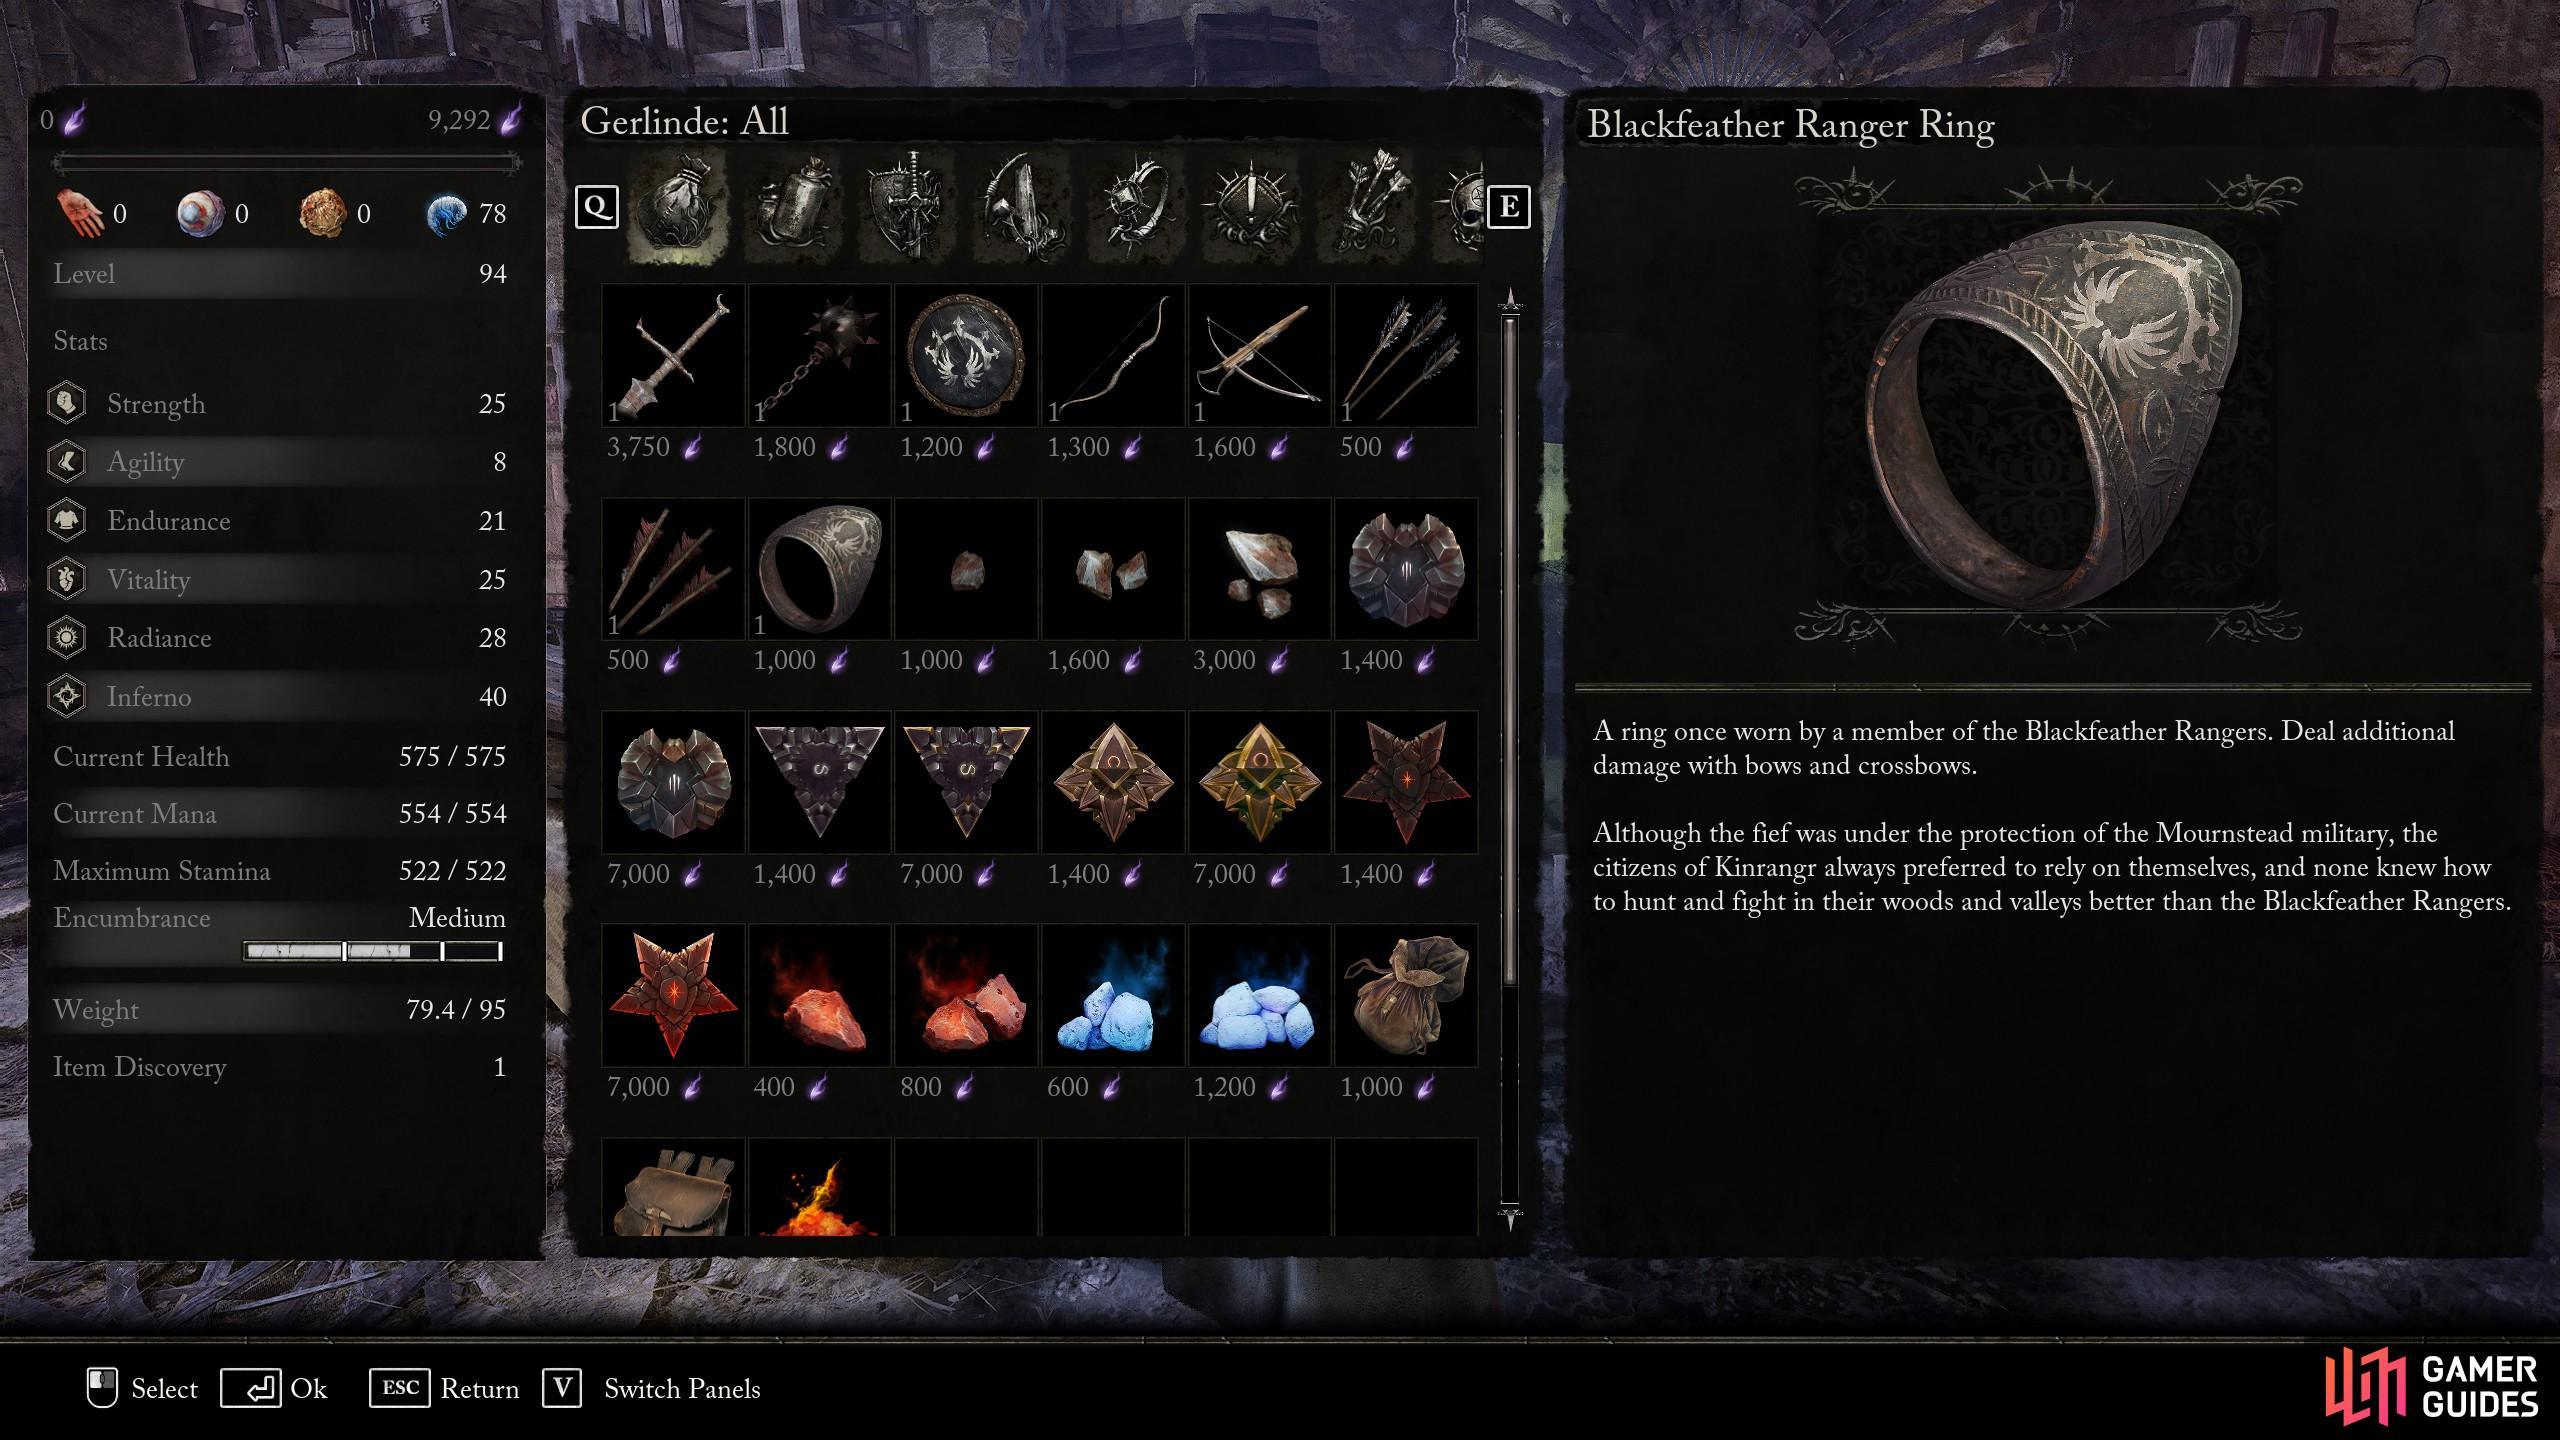 This is a crucial ring for any Blackfeather Ranger Build in Lords of the Fallen.